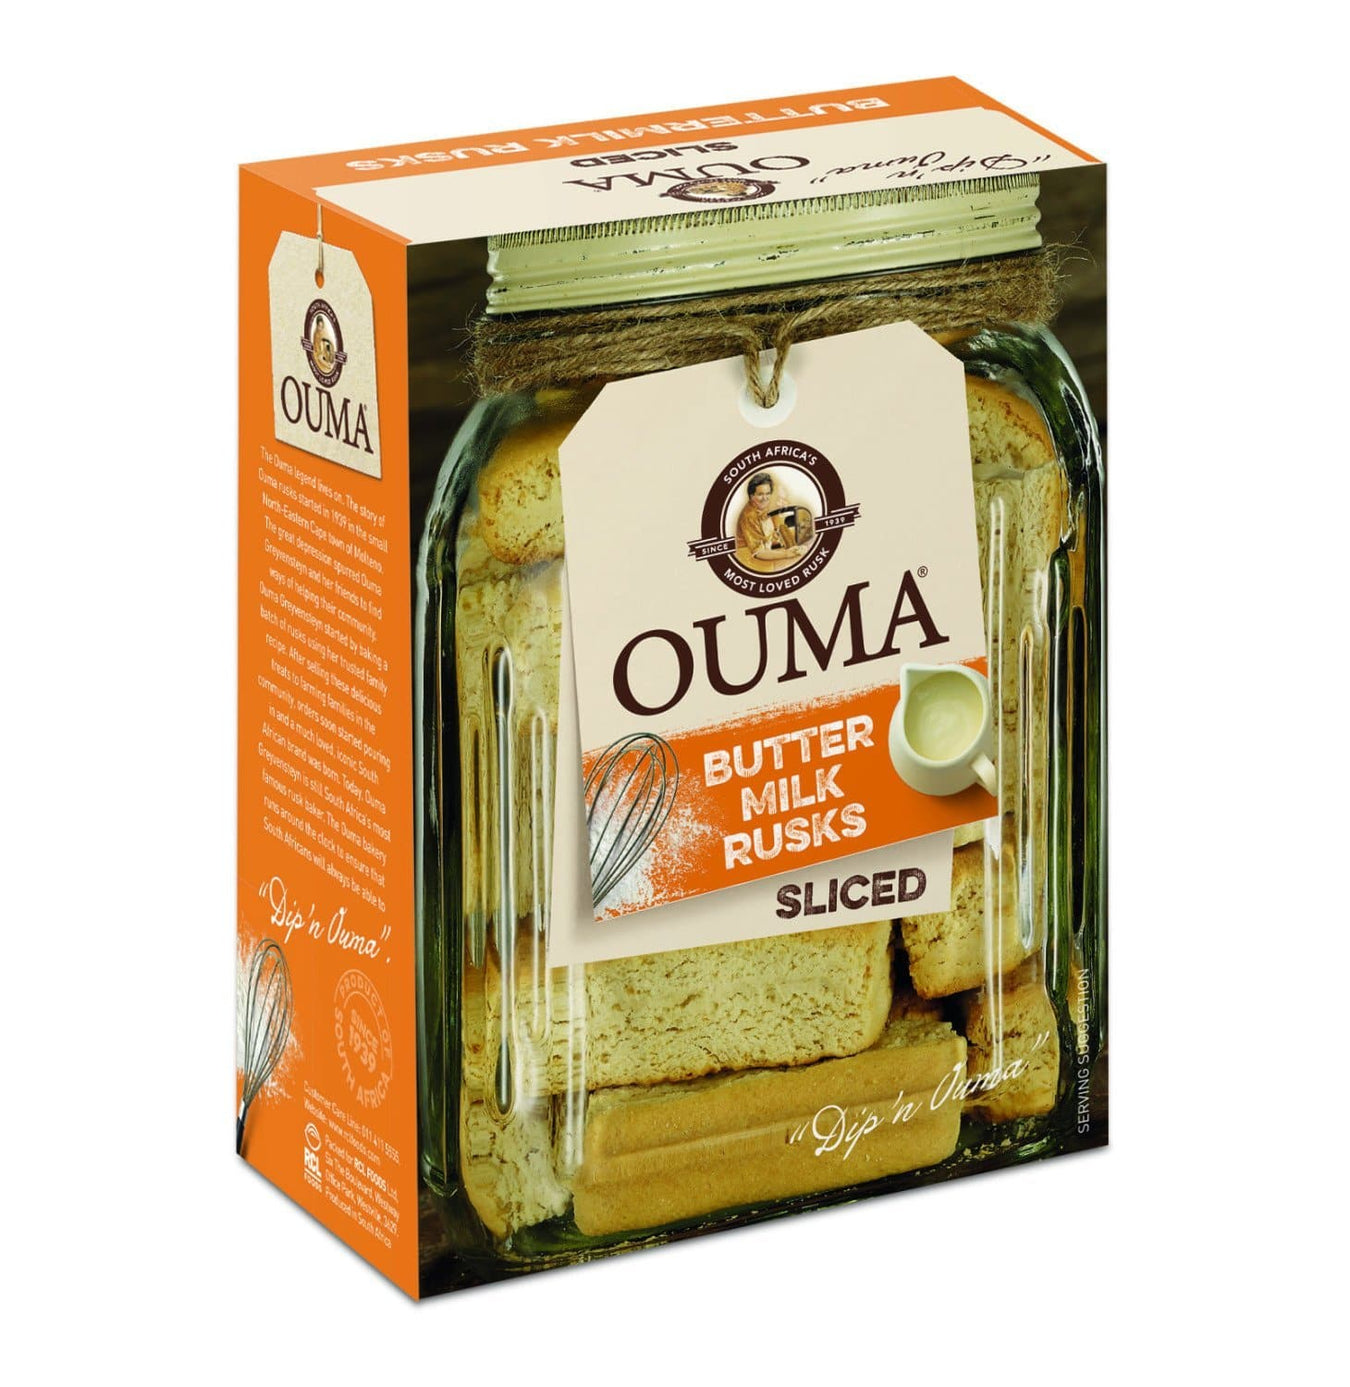 $ 4 OUMA RUSK SPECIAL! LIMITED TIME ONLY.